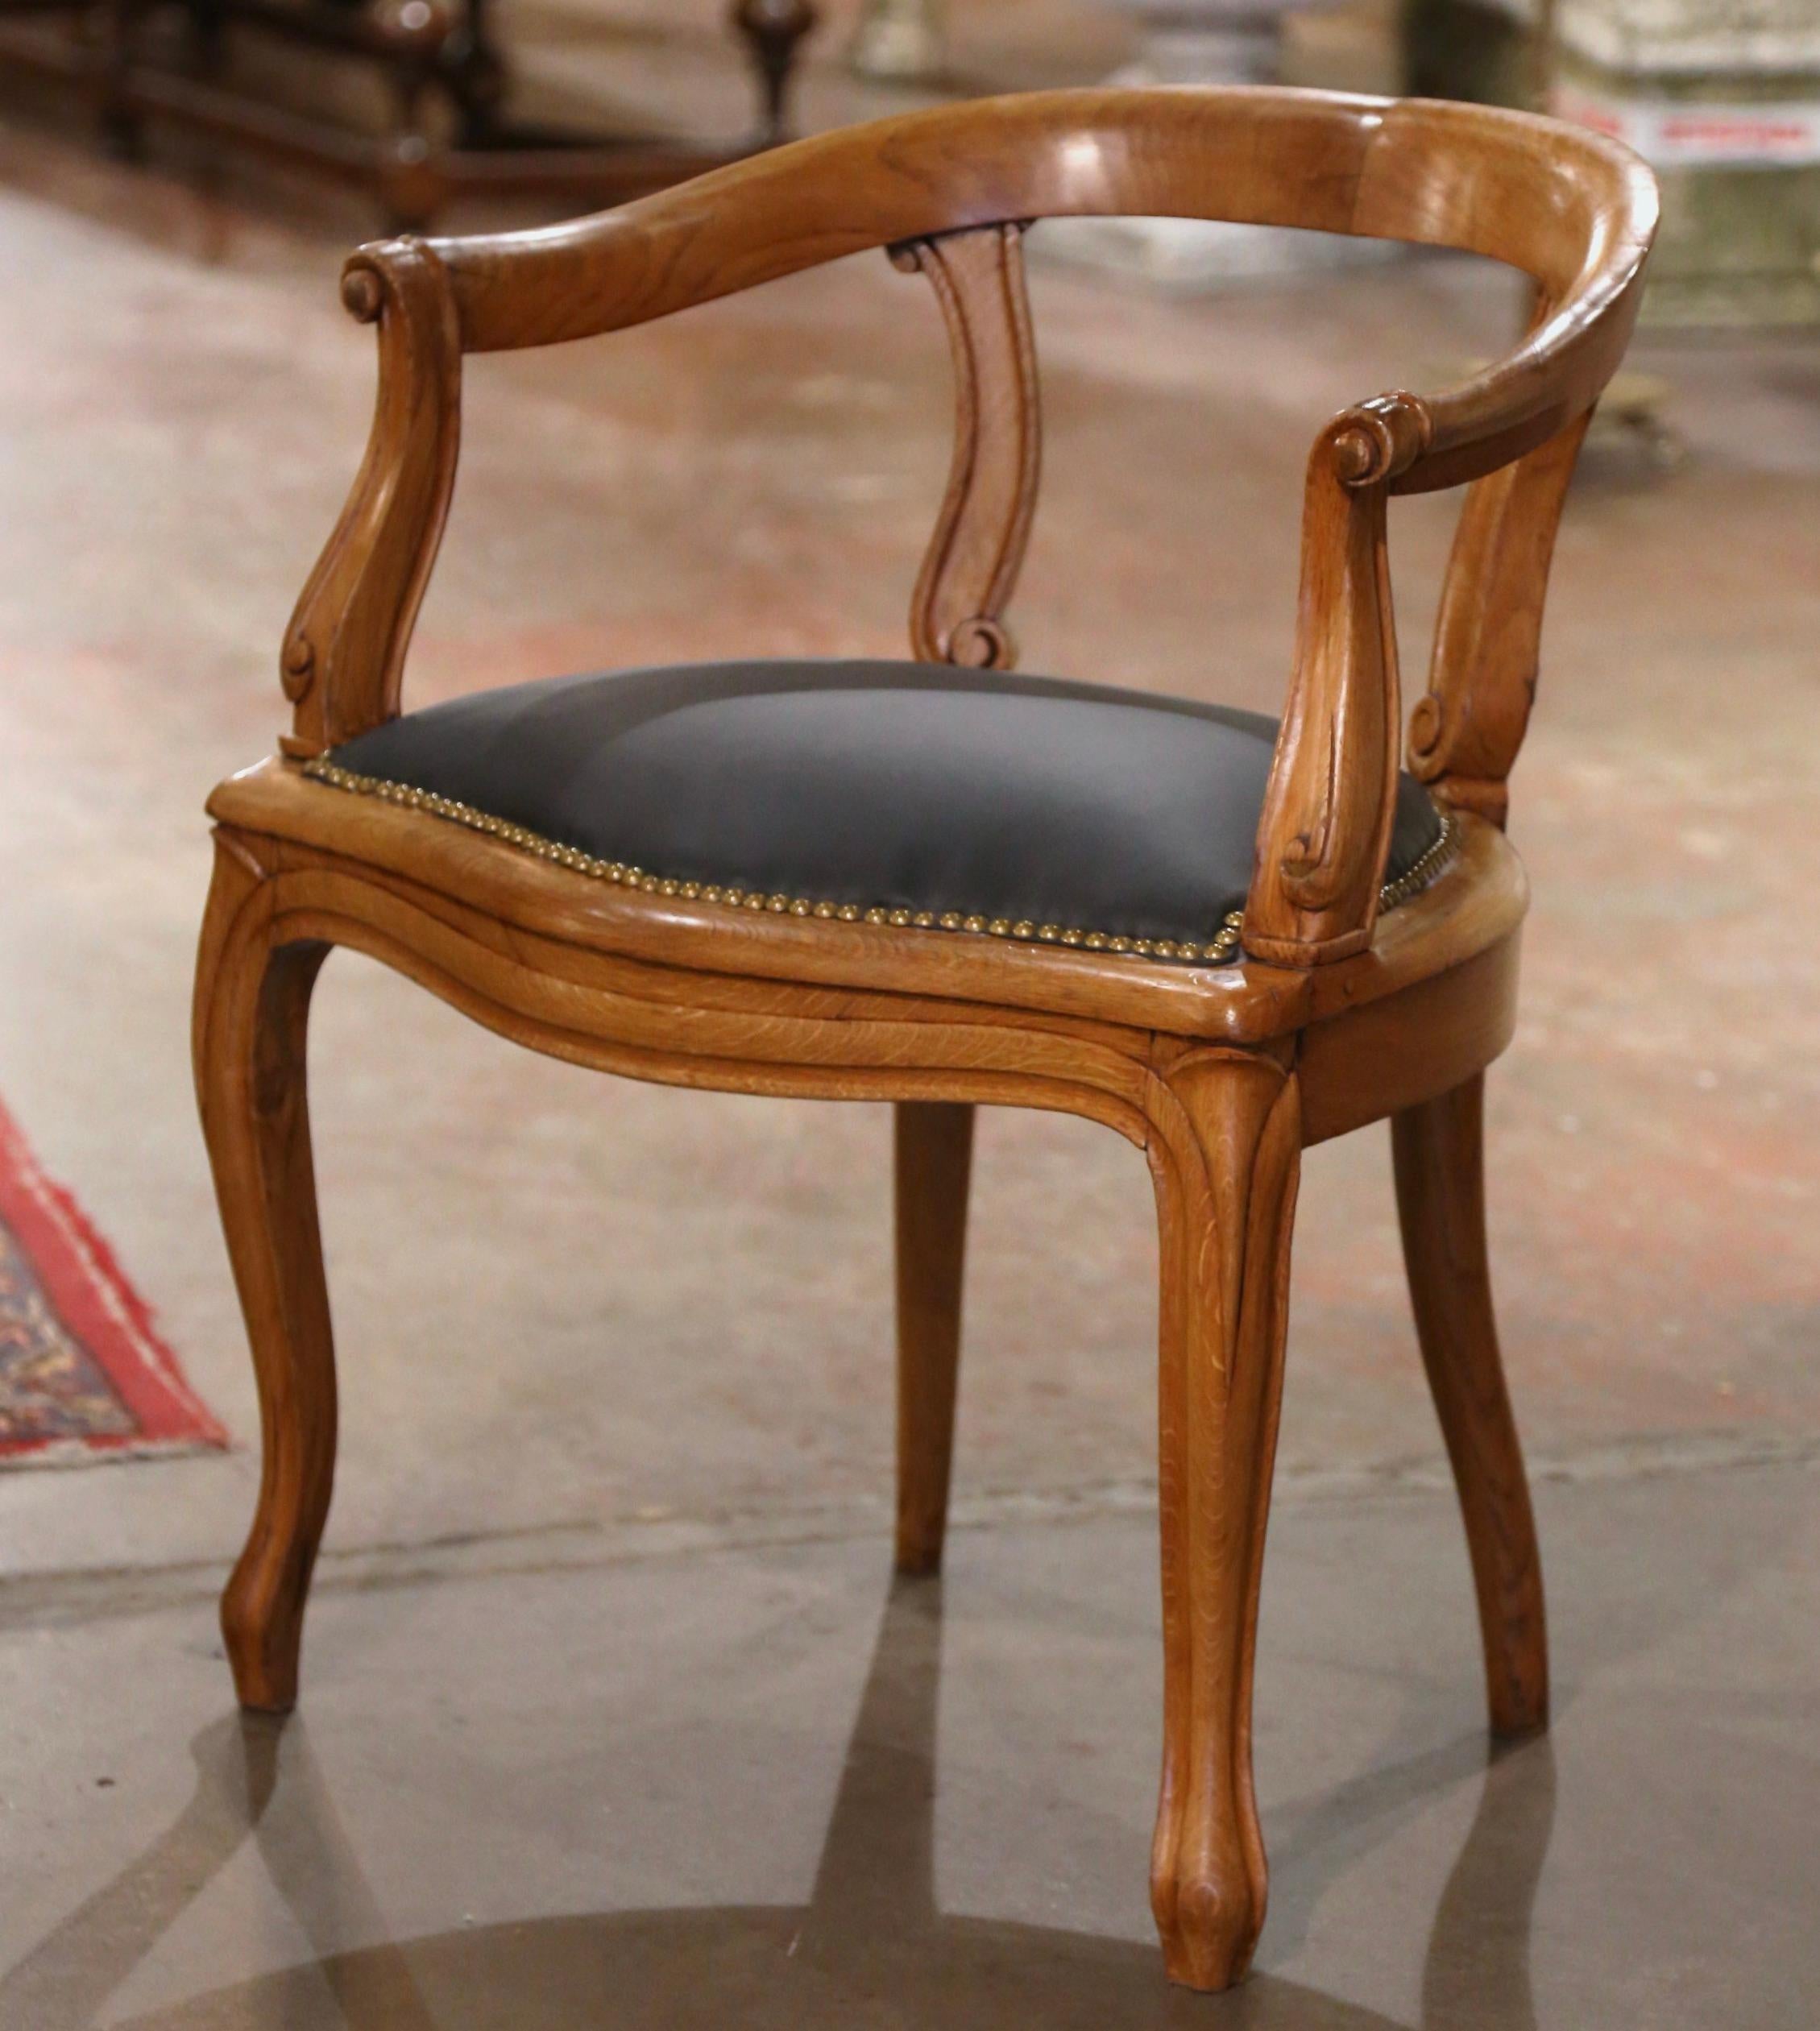 The sophisticated antique armchair would make an elegant yet subtle statement behind a man or woman's desk. Crafted in France circa 1880 and made of elm, the carved armchair sits on front cabriole legs; the chair features a rounded and curved back,